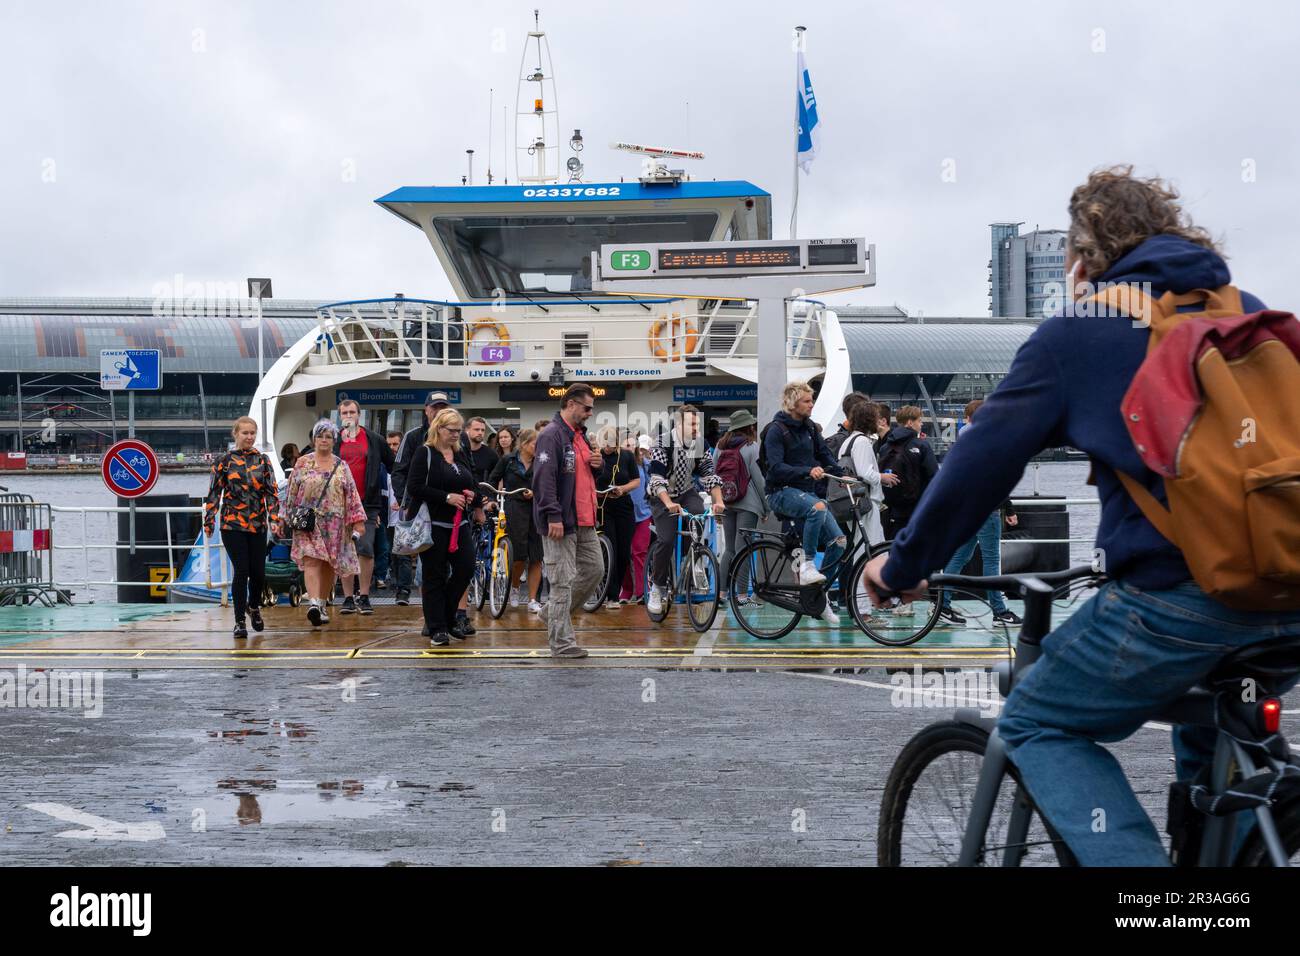 Amsterdam, The Netherlands - 8 September 2022: People leaving a GVB ferryboat Stock Photo